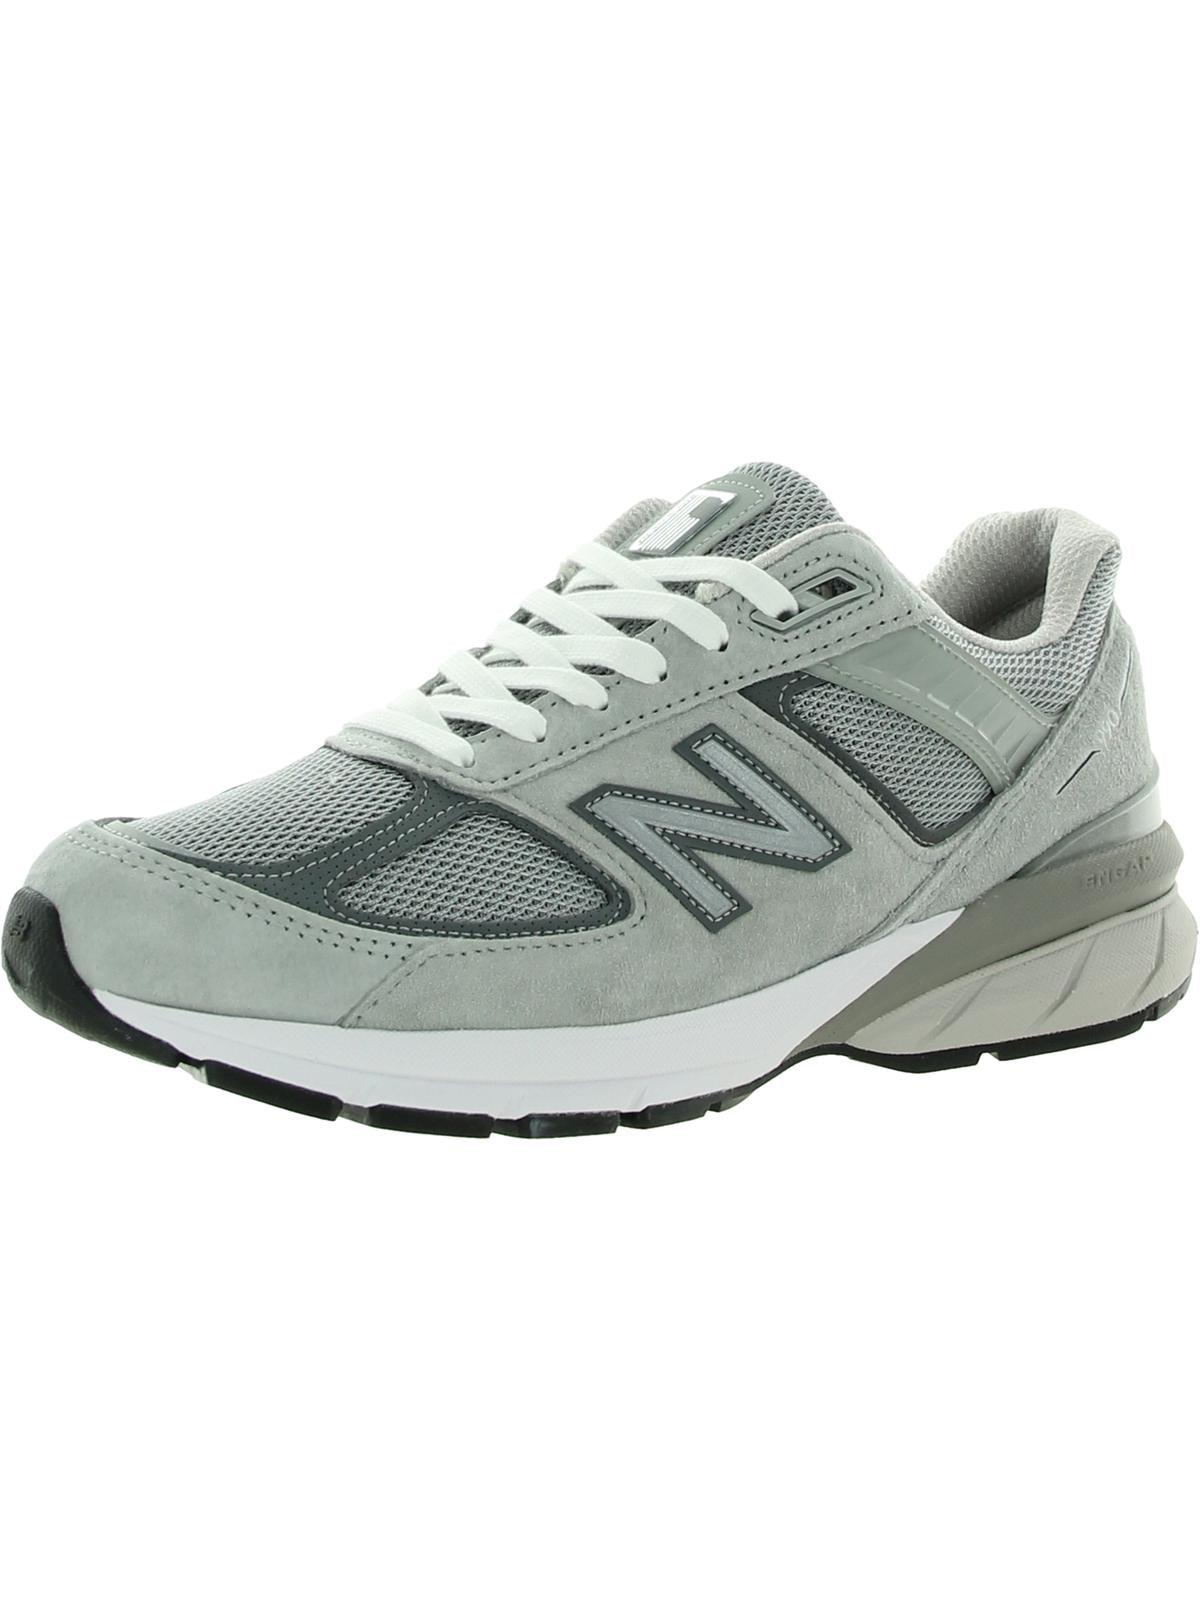 New Balance 990v5 Fitness Workout Running Shoes in Gray | Lyst